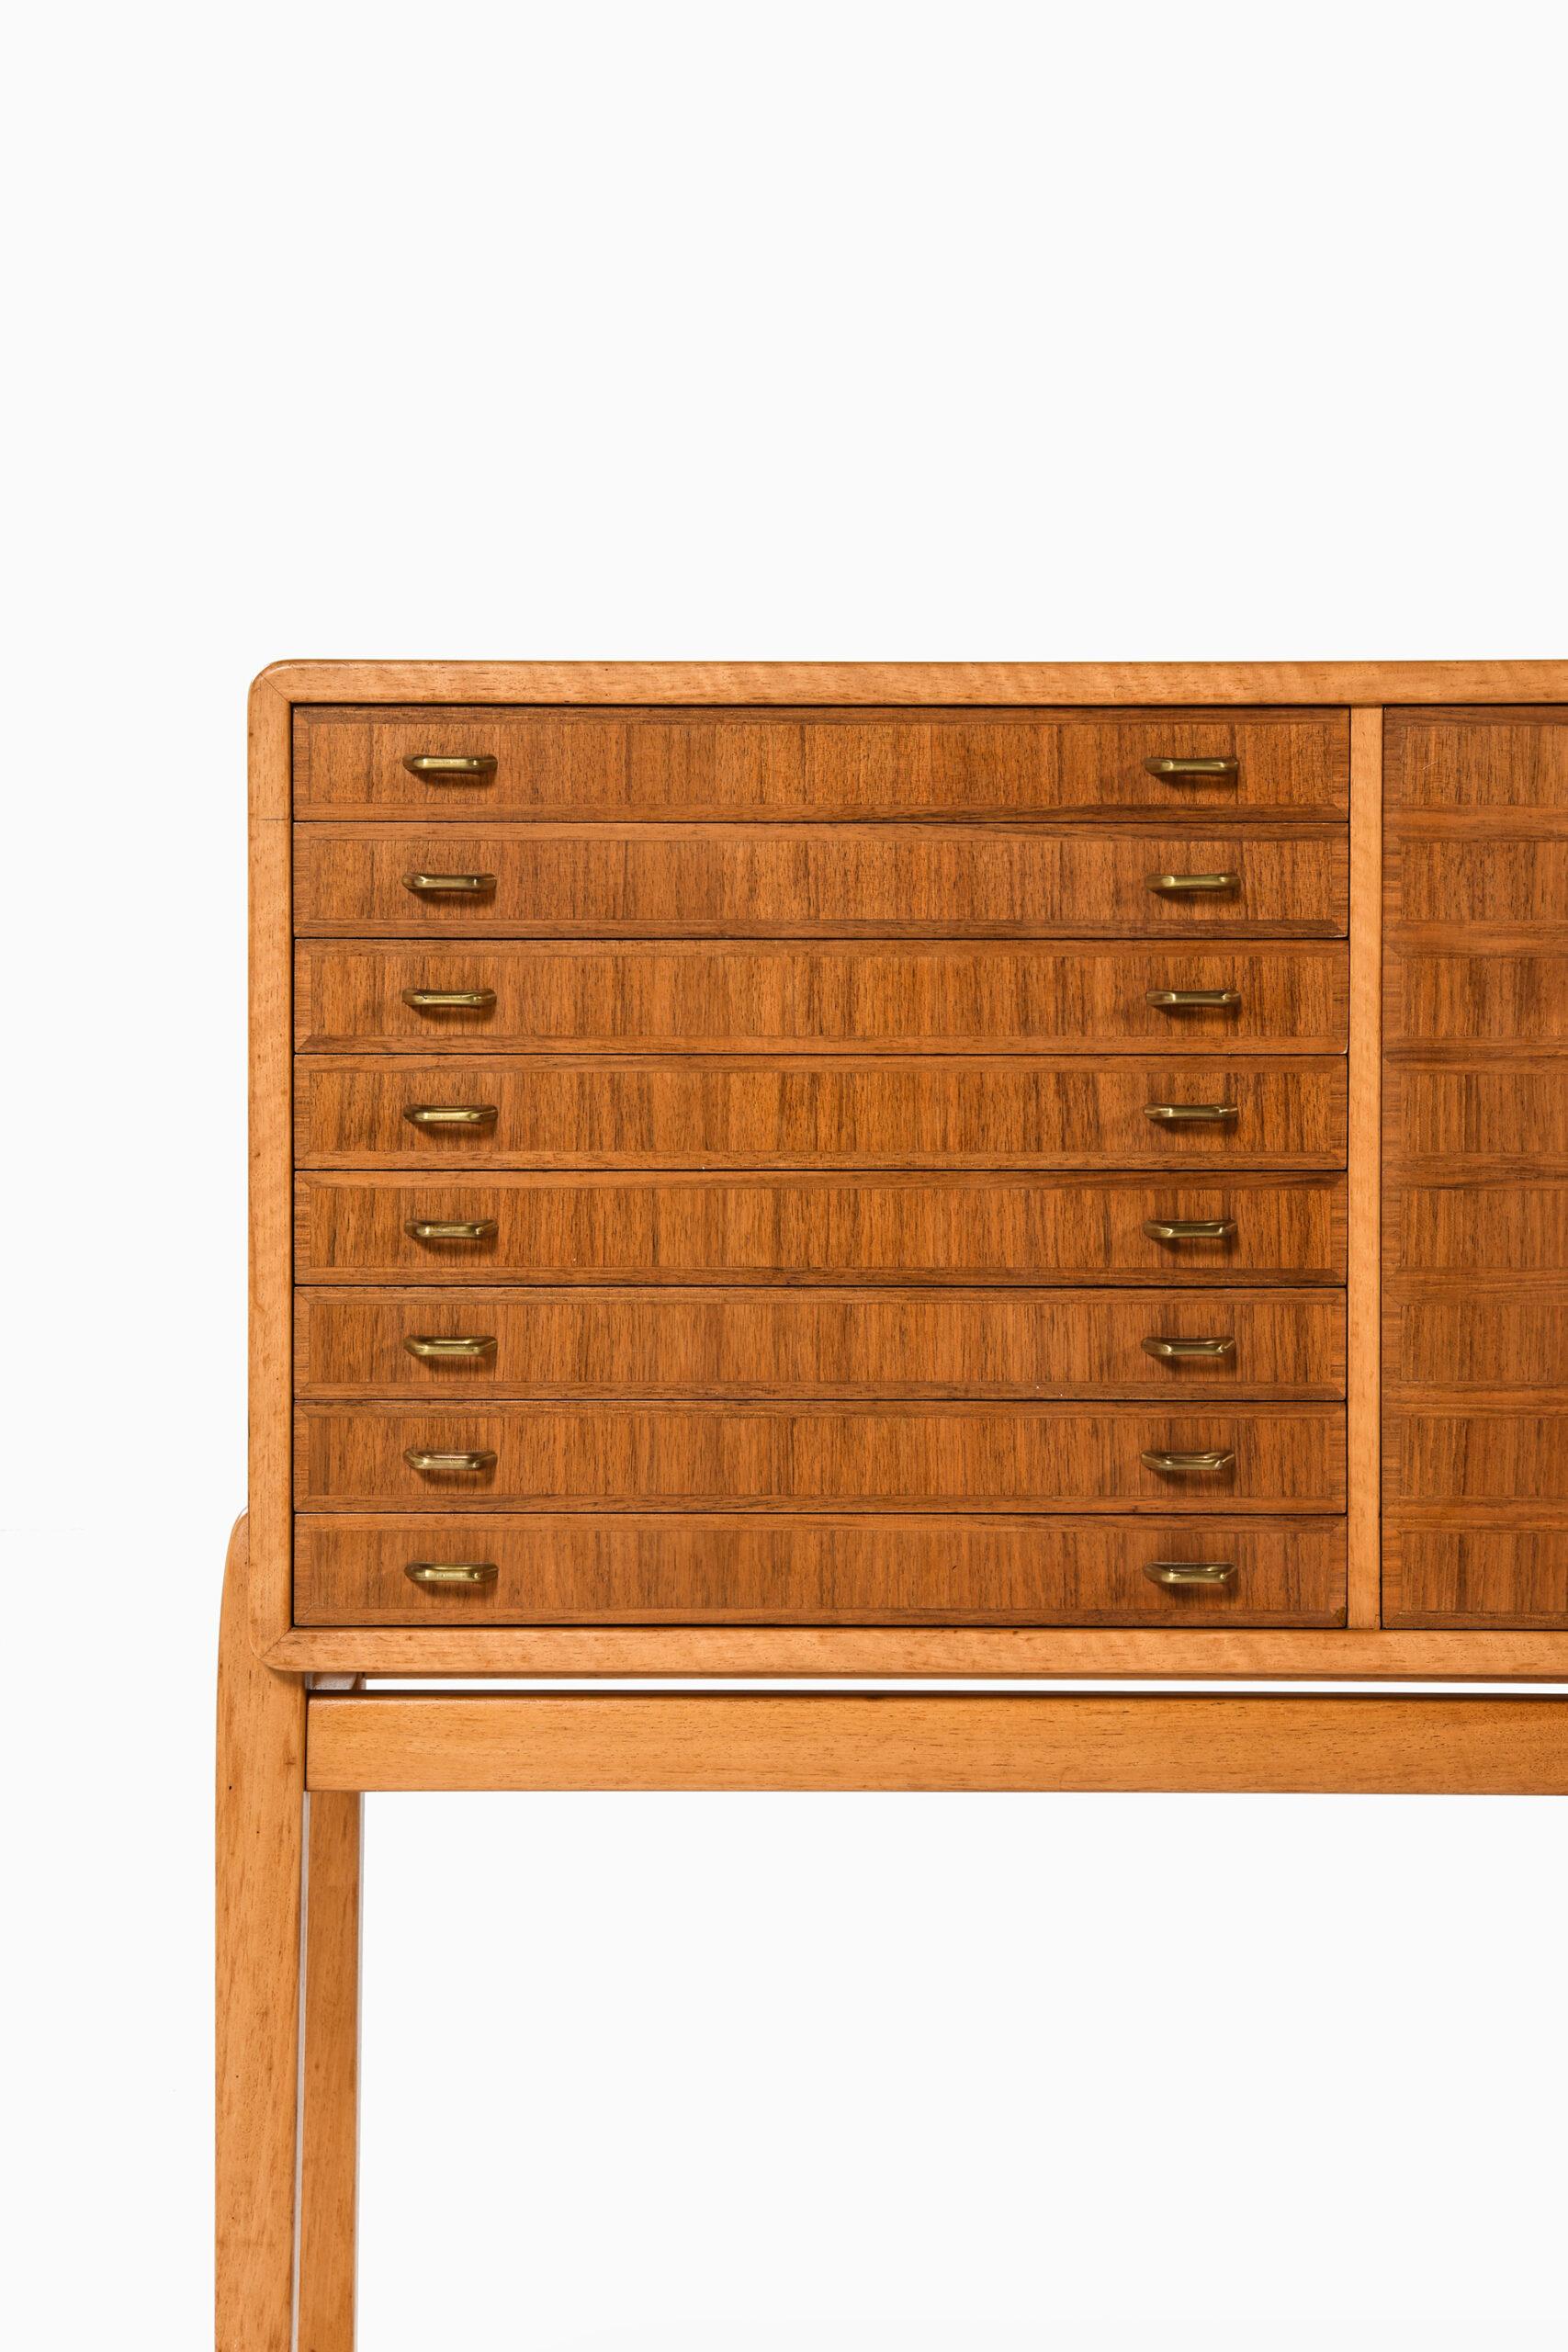 Rare freestanding cabinet attributed to Carl-Axel Acking. Produced in Sweden.